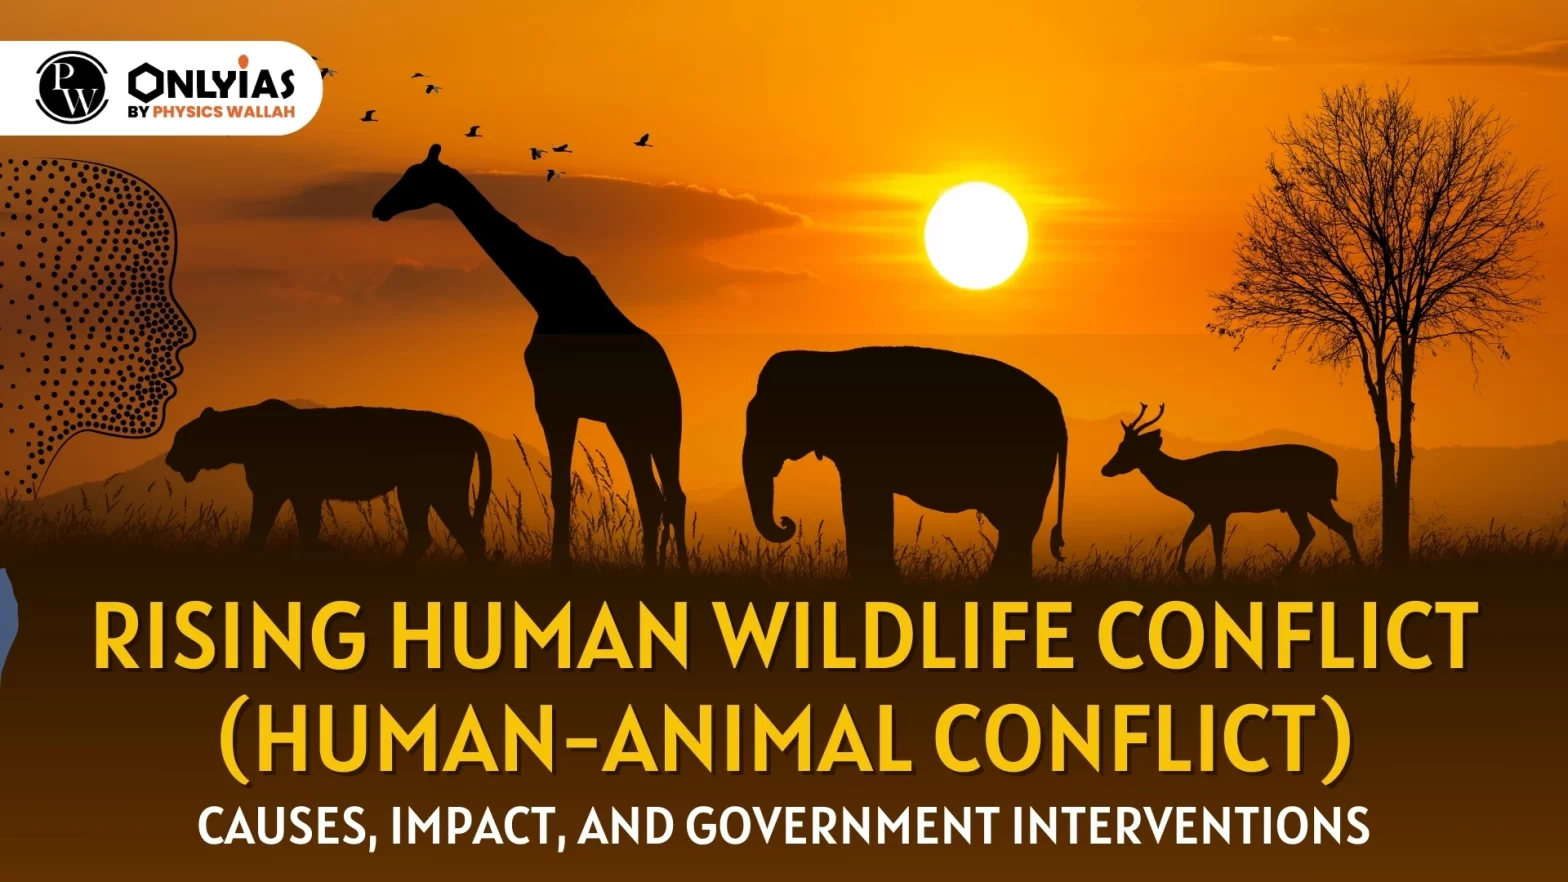 Rising Human Wildlife Conflict (Human-Animal Conflict): Causes, Impact, and Government Interventions